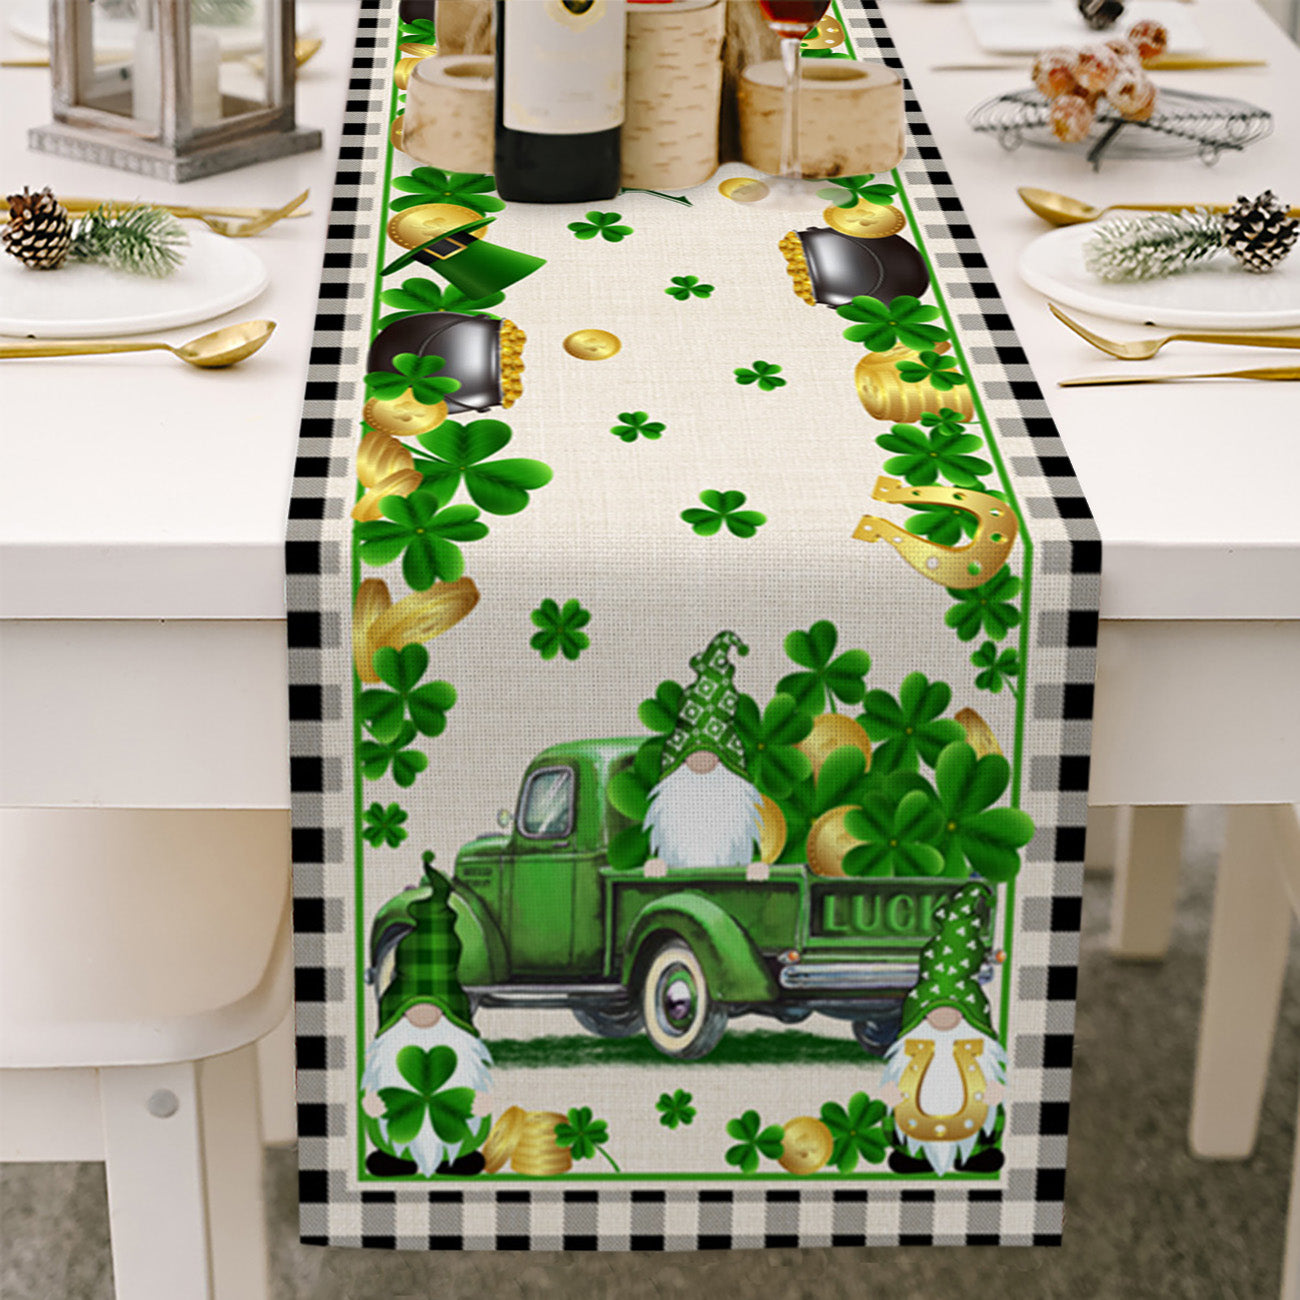 Green Truck - St. Patrick's Day Gnome Table Runner